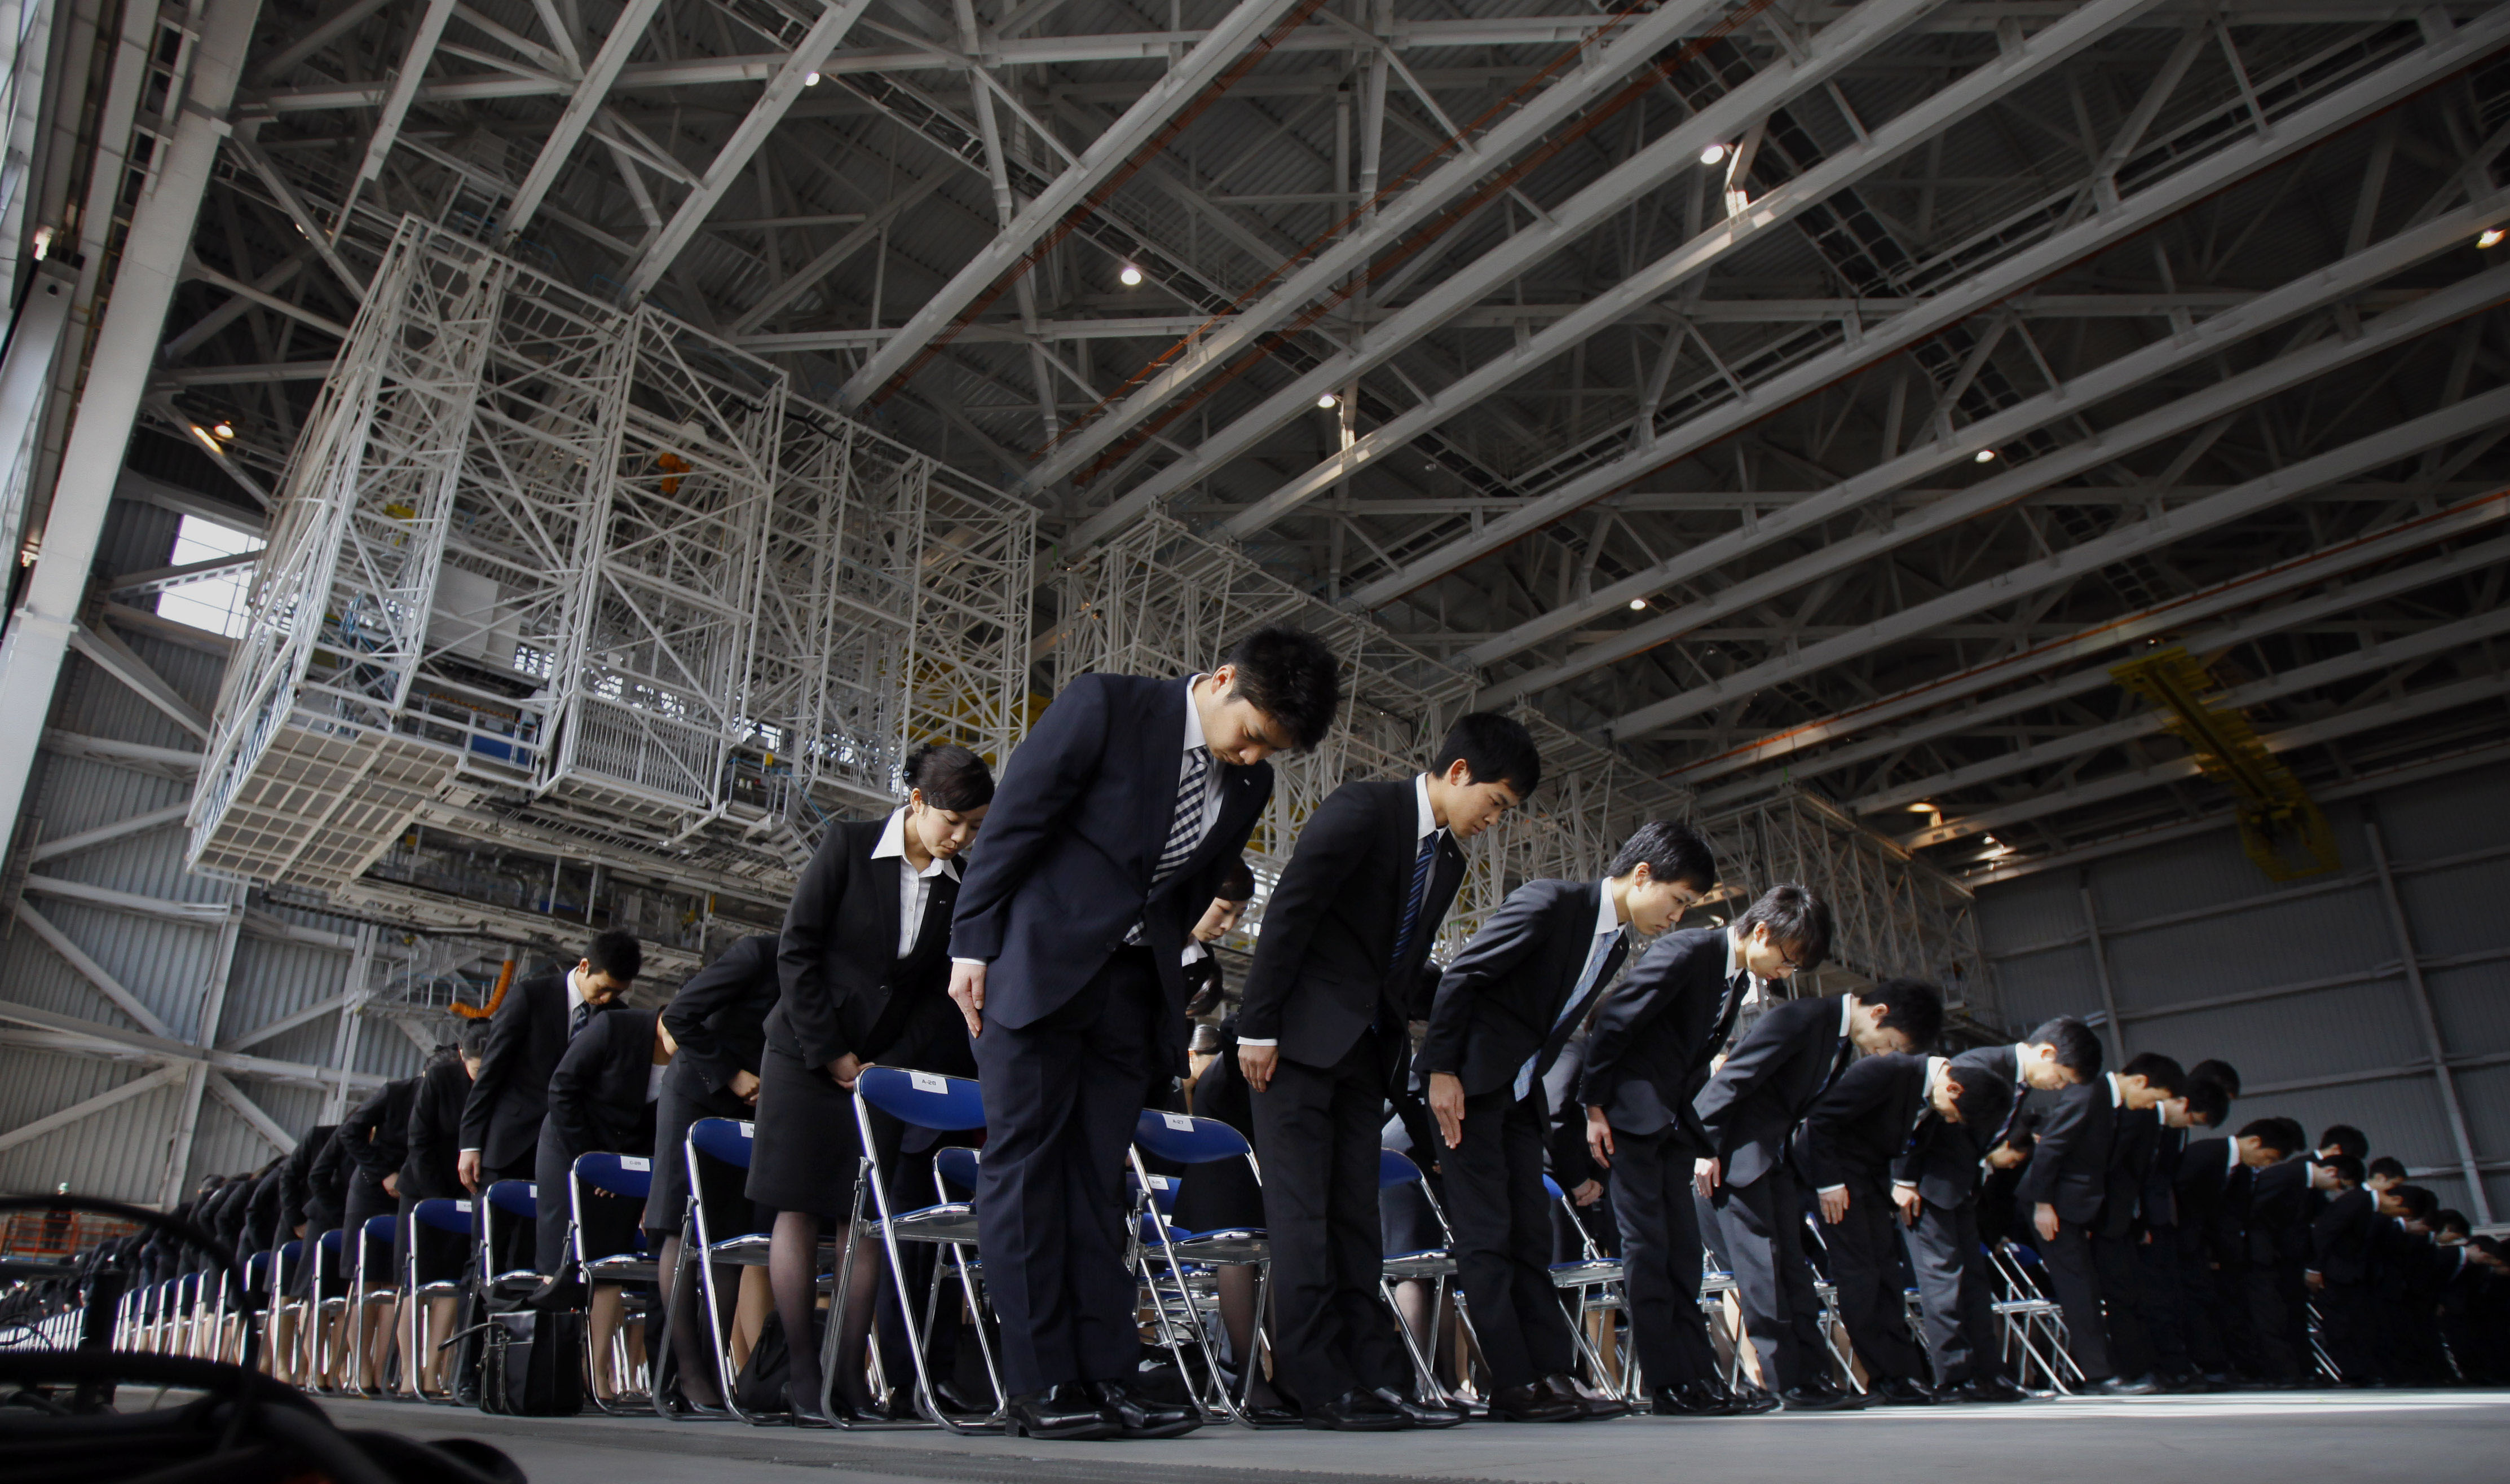 Newly hired employees of All Nippon Airways and ANA group companies bow during an initiation ceremony at the company's aircraft maintenance hangar in Haneda airport in Tokyo Monday, April 1, 2013. A total 1,068 new recruits attended the ceremony, according to the company. (AP Photo/Junji Kurokawa)